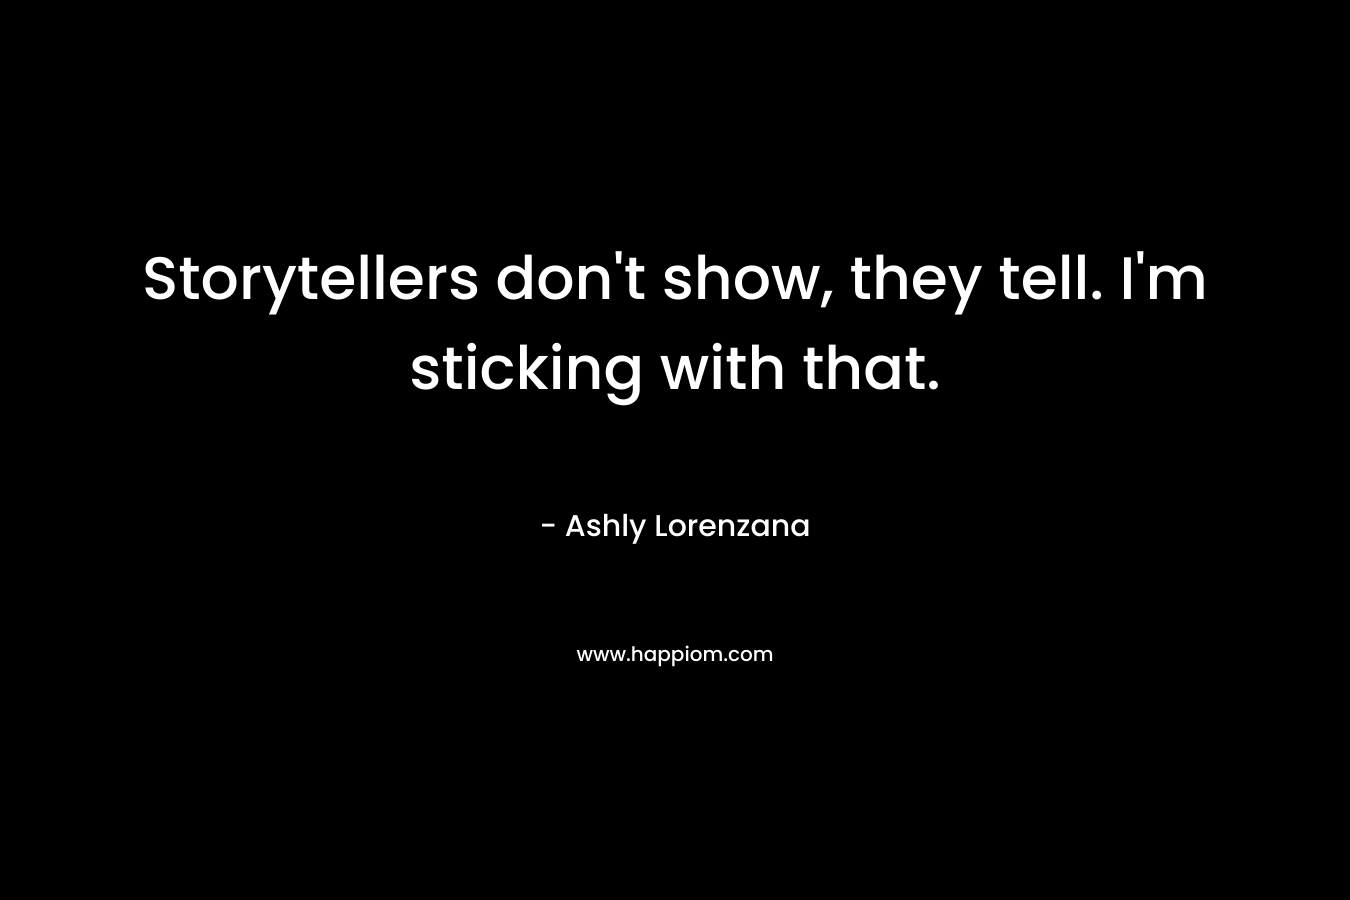 Storytellers don’t show, they tell. I’m sticking with that. – Ashly Lorenzana